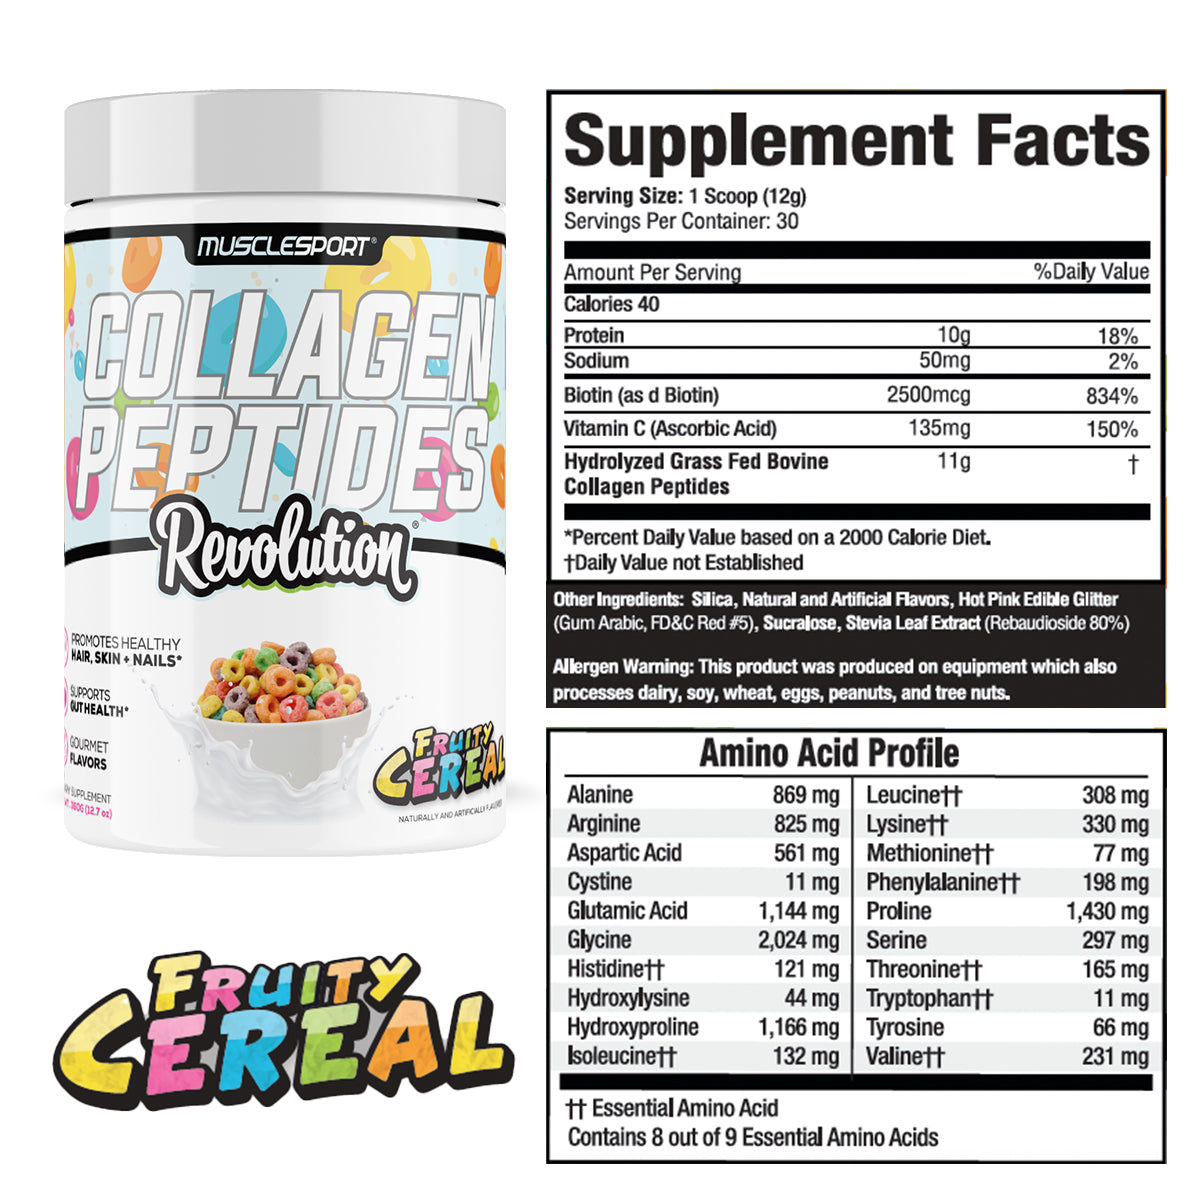 Collagen Peptides Fruity Cereal Supplement Facts